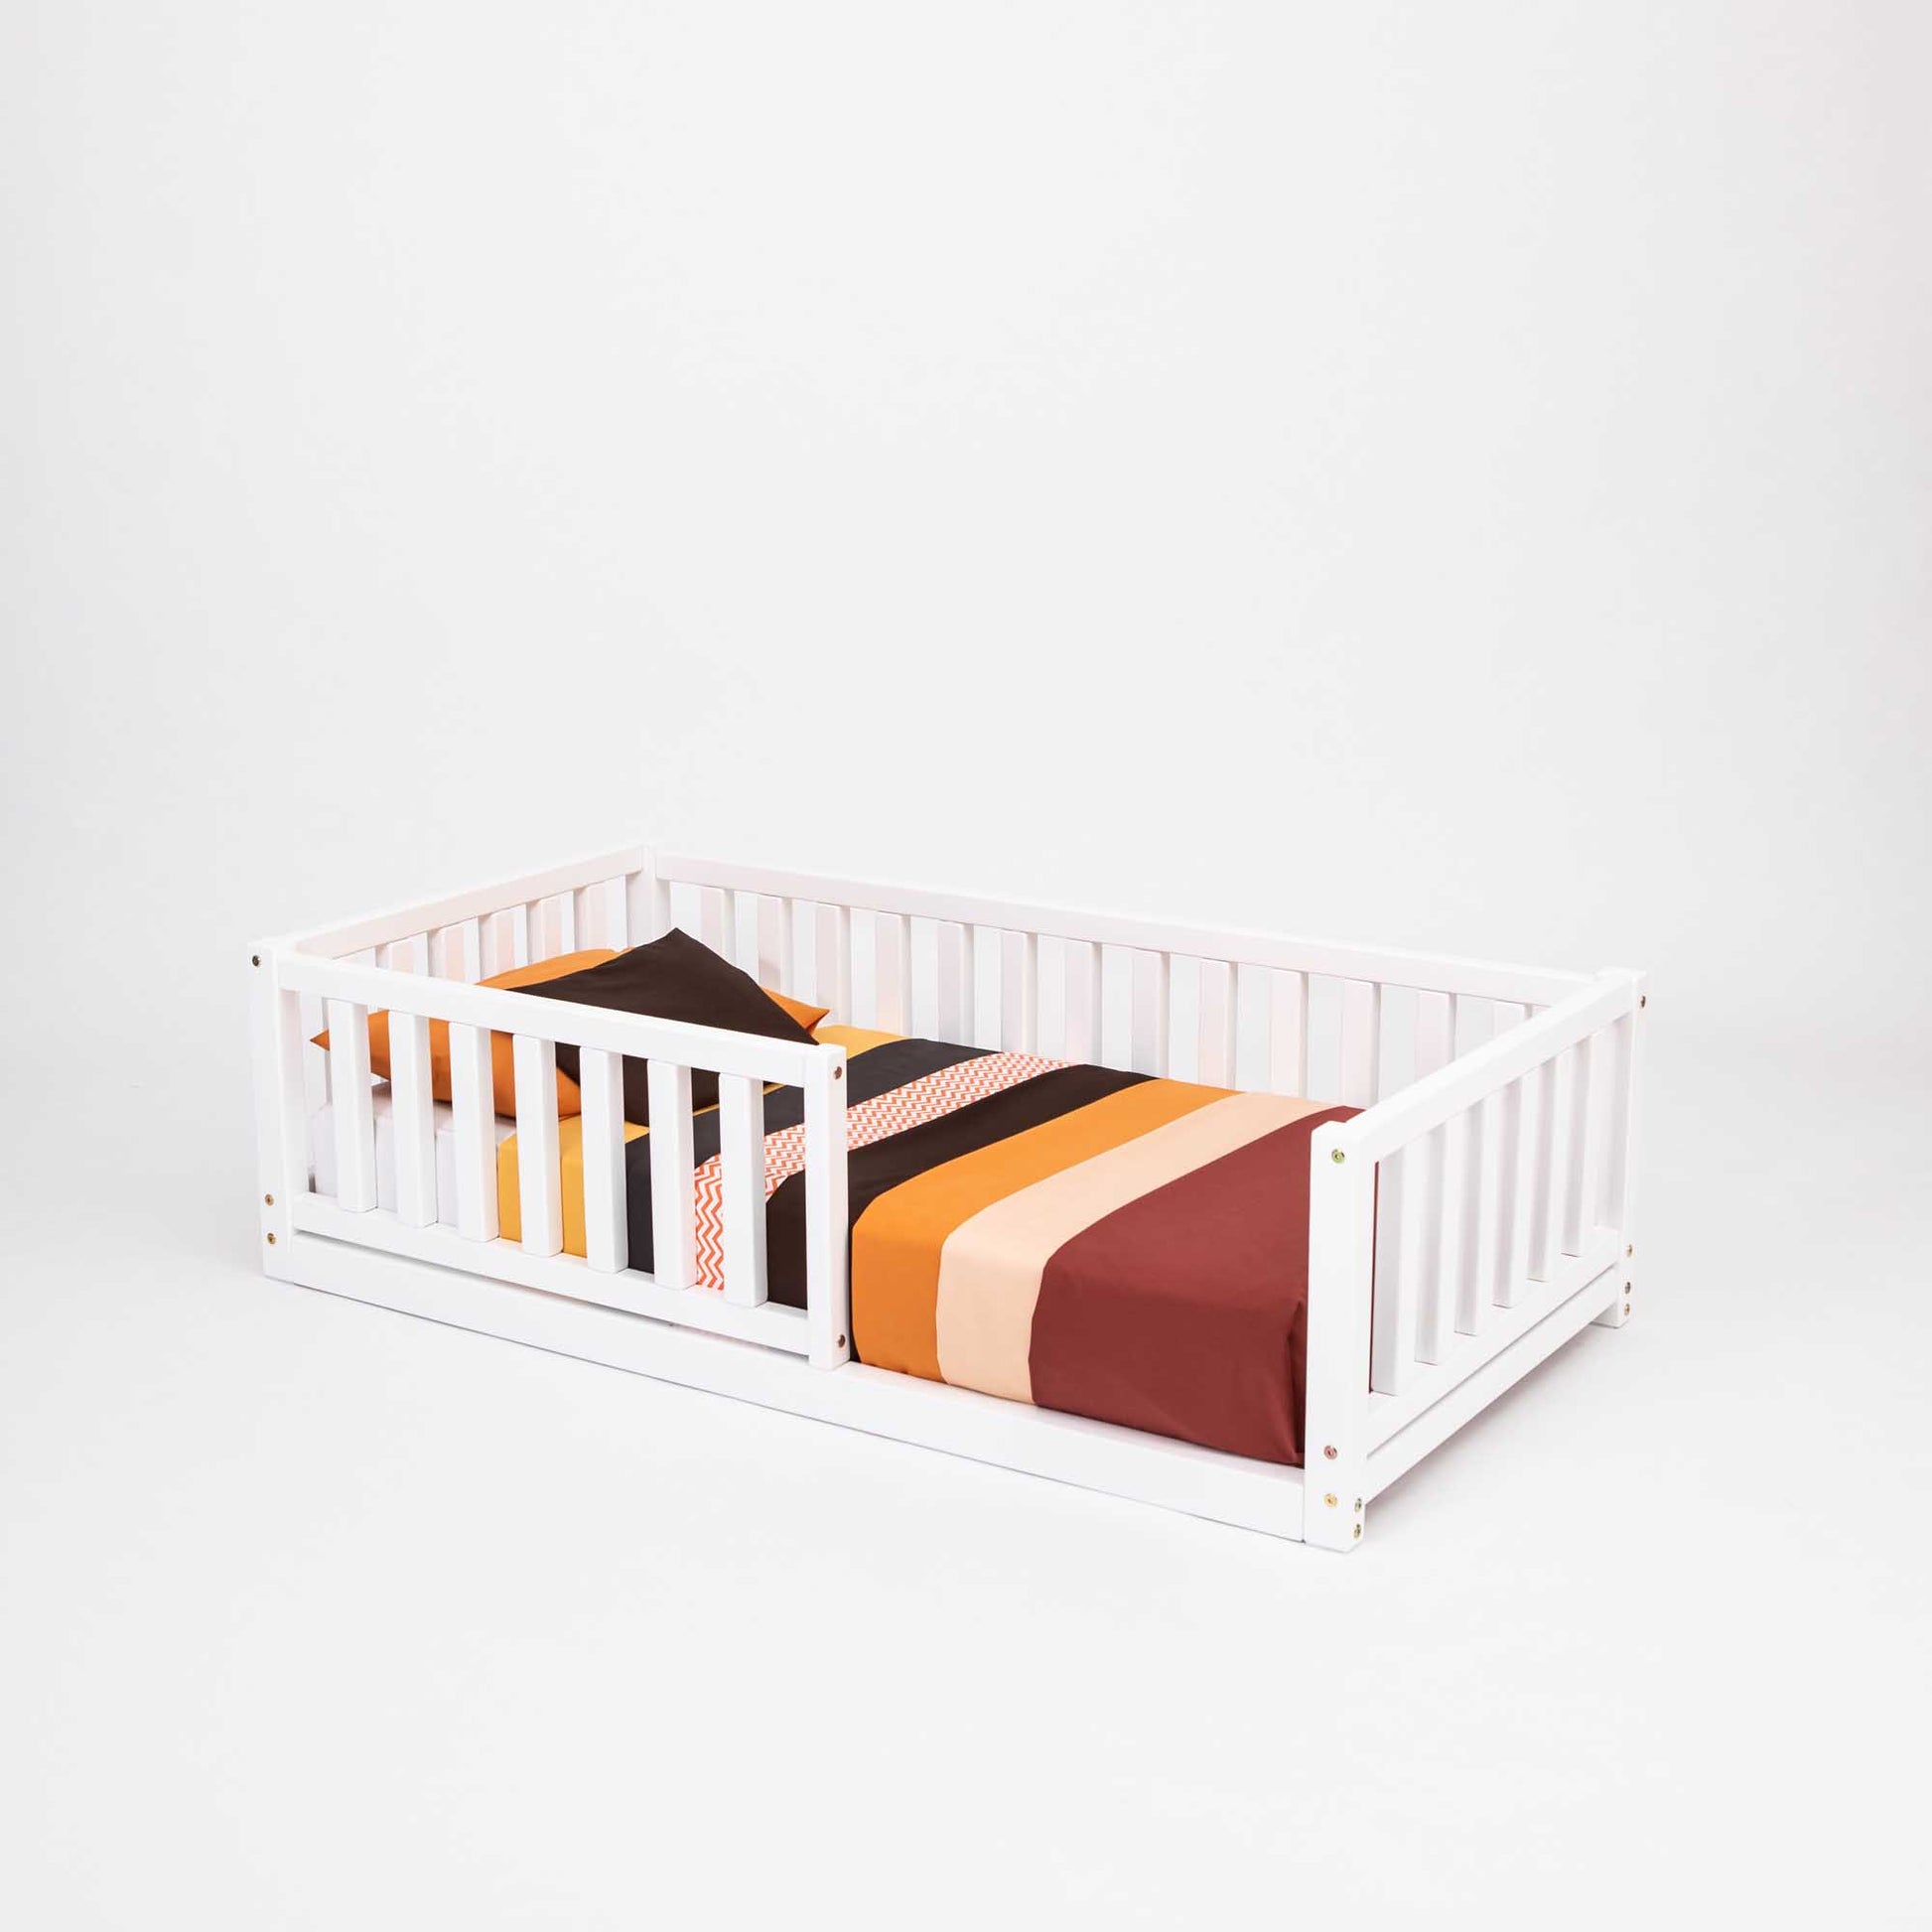 A long-lasting 2-in-1 toddler bed on legs with a vertical rail fence made of solid pine, with striped sheets covering it by Sweet Home From Wood.